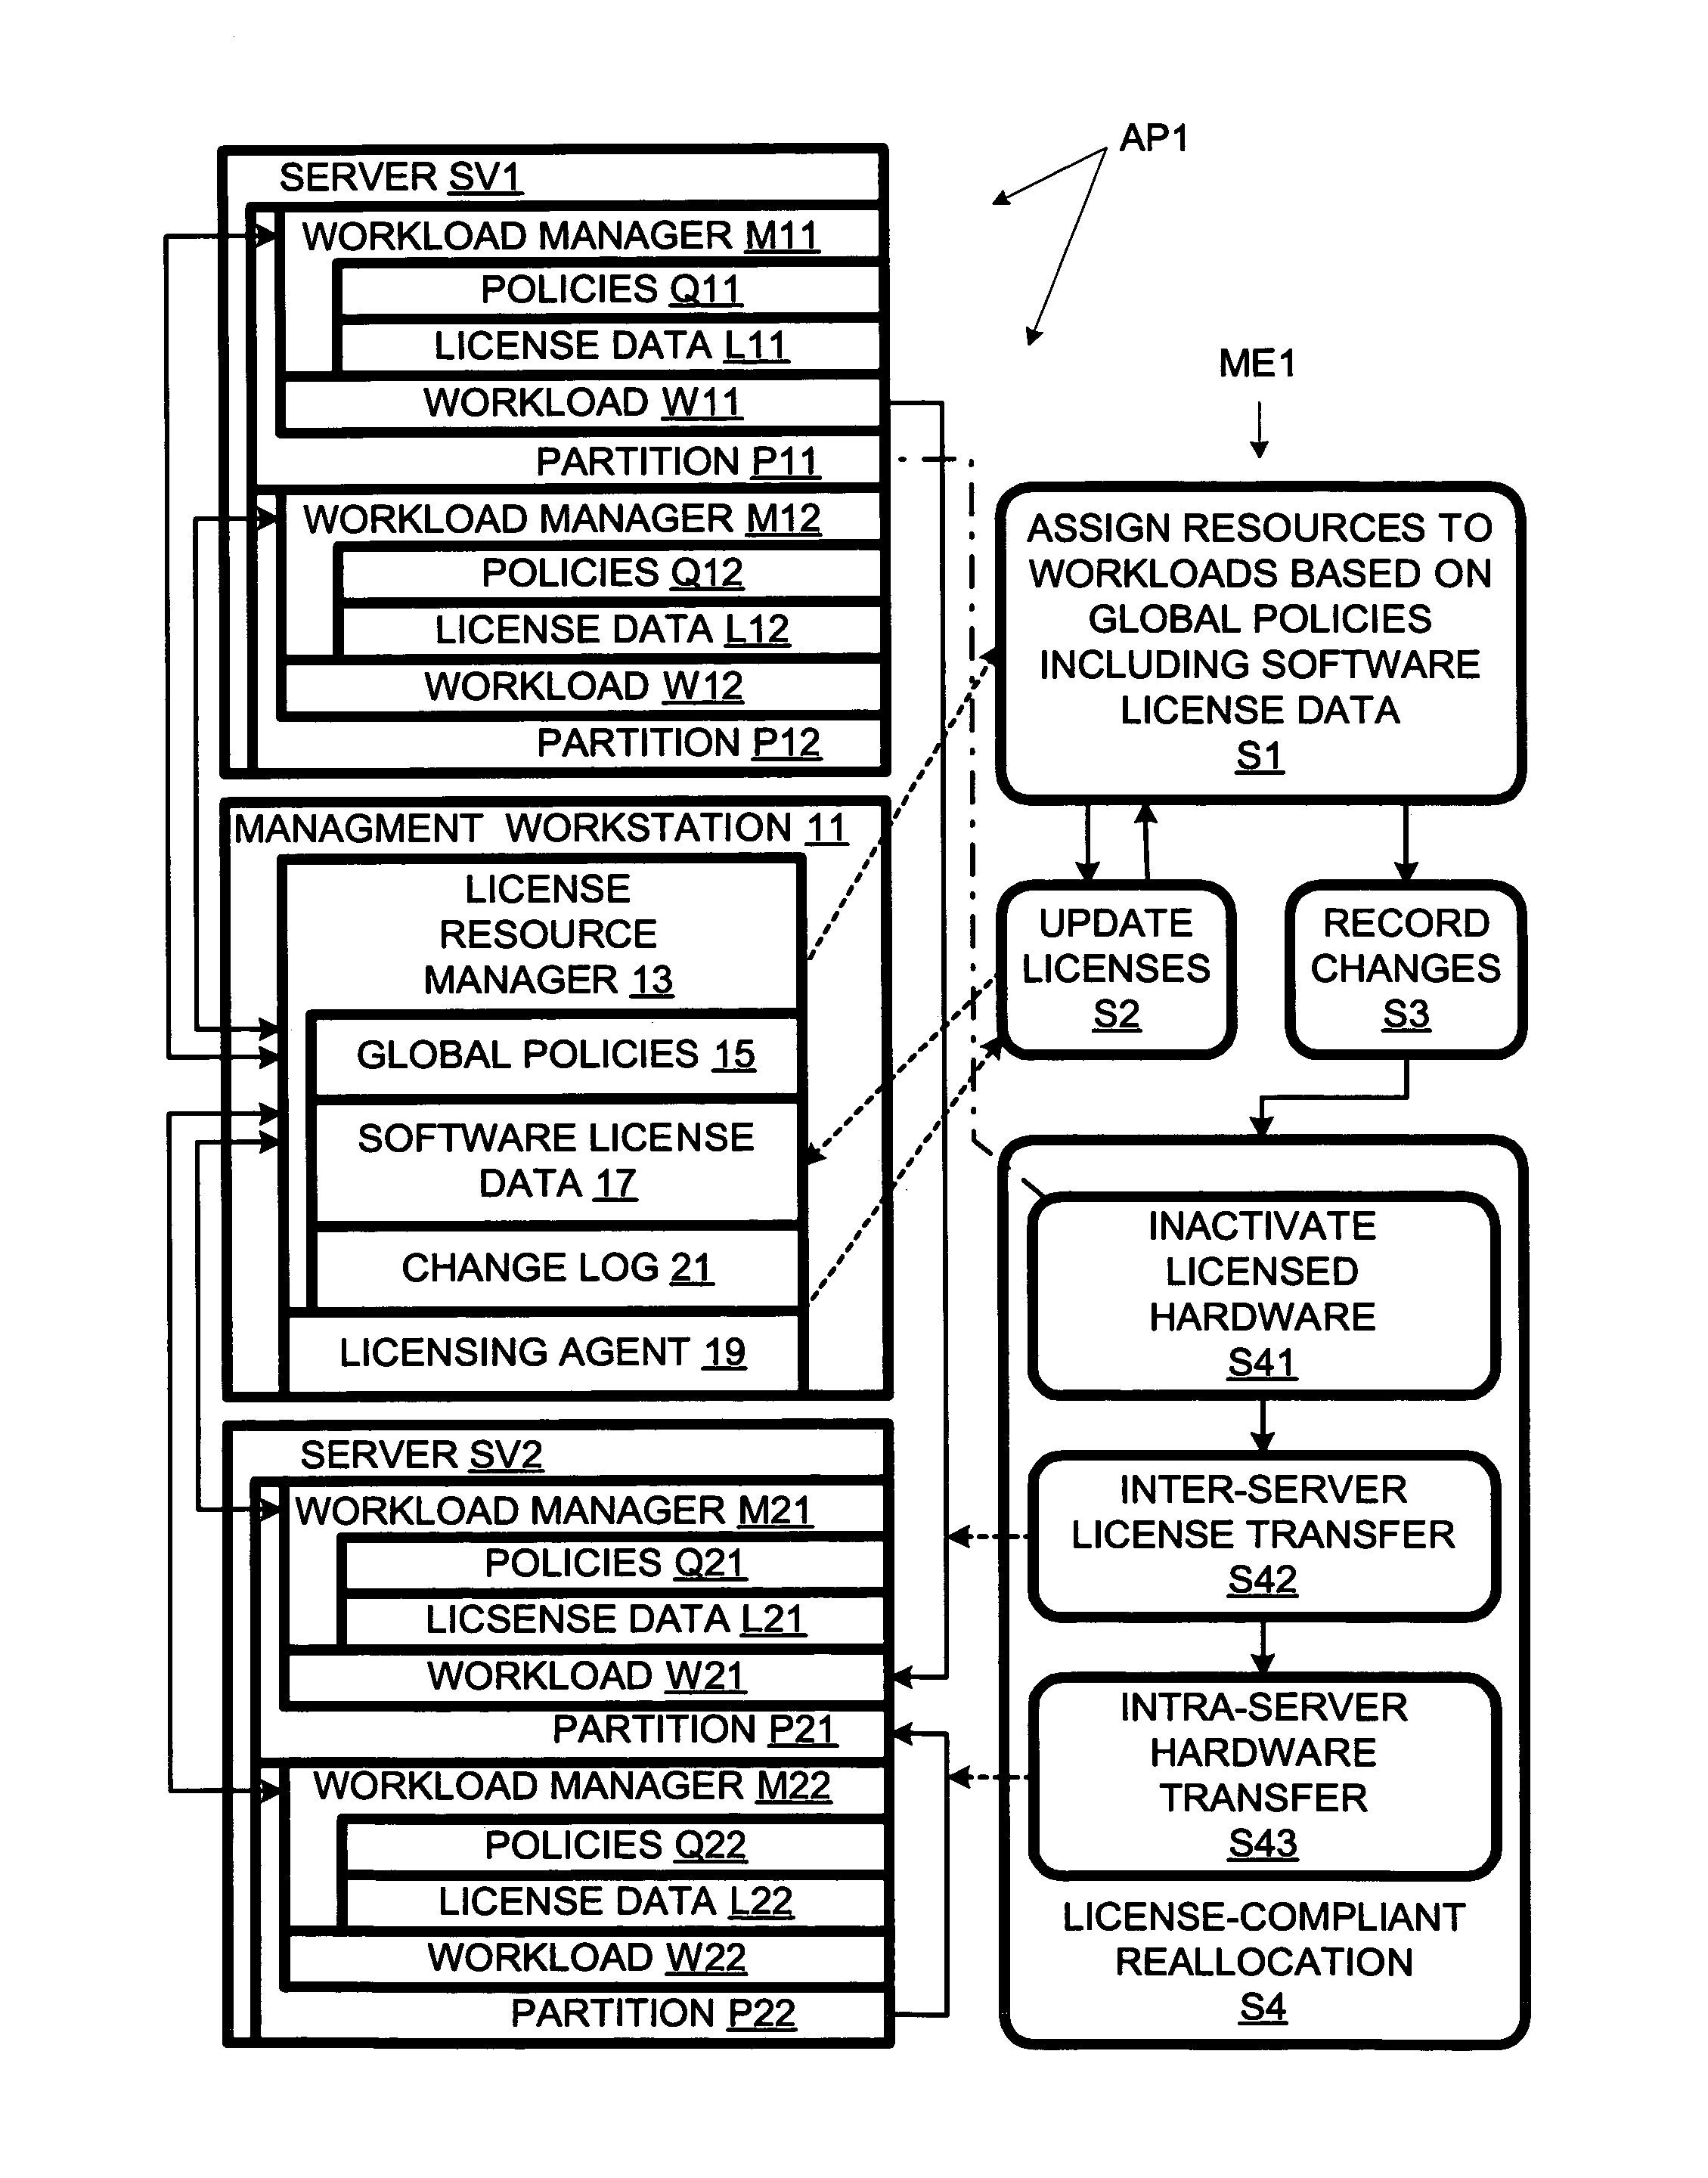 Workload reallocation involving inter-server transfer of software license rights and intra-server transfer of hardware resources